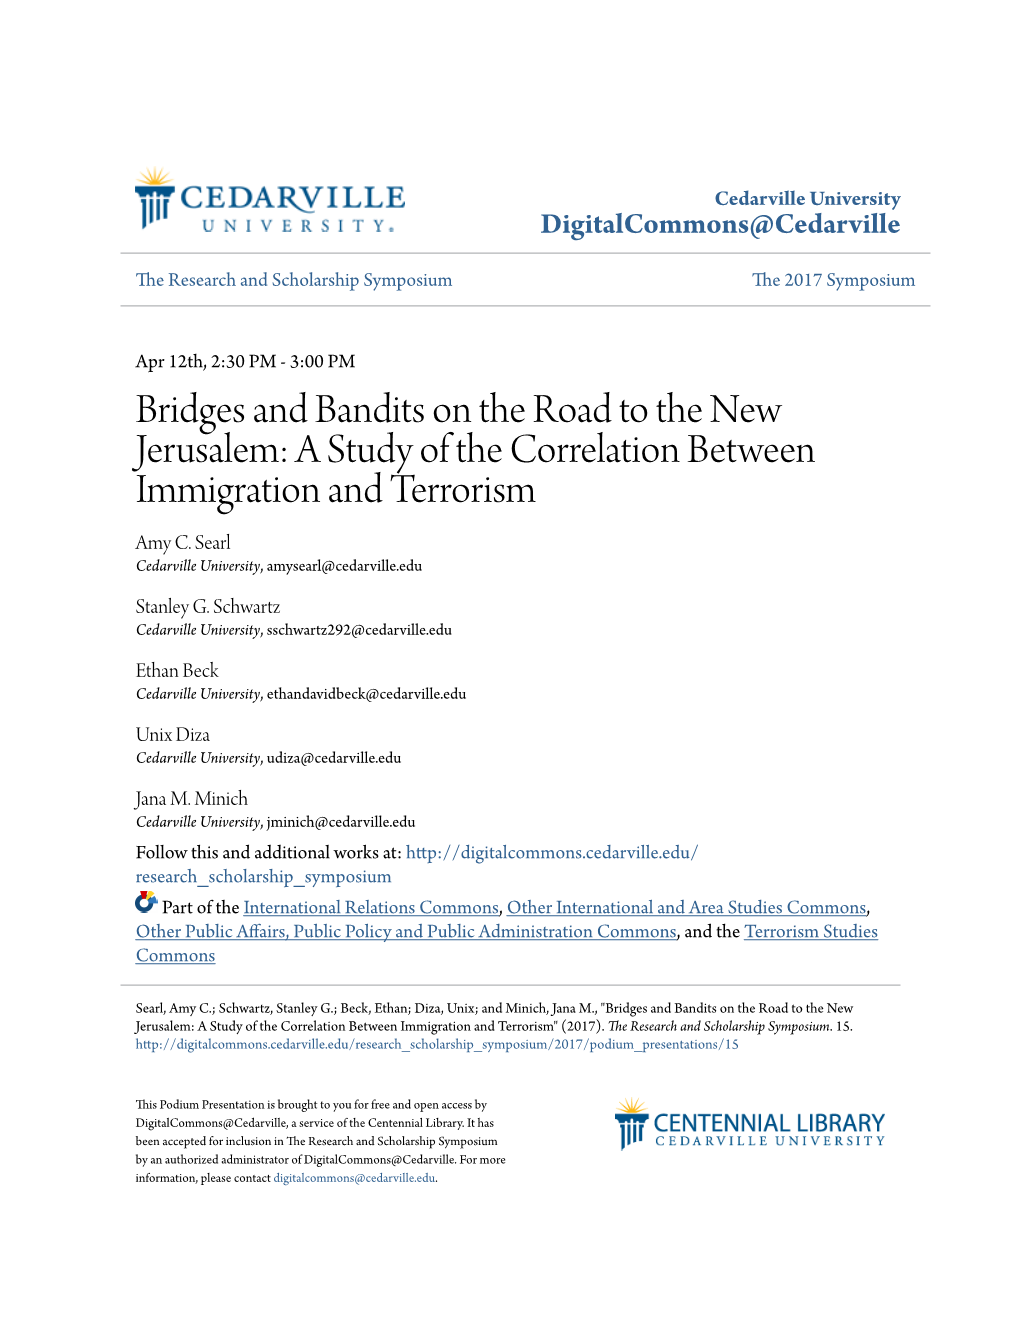 Bridges and Bandits on the Road to the New Jerusalem: a Study of the Correlation Between Immigration and Terrorism Amy C